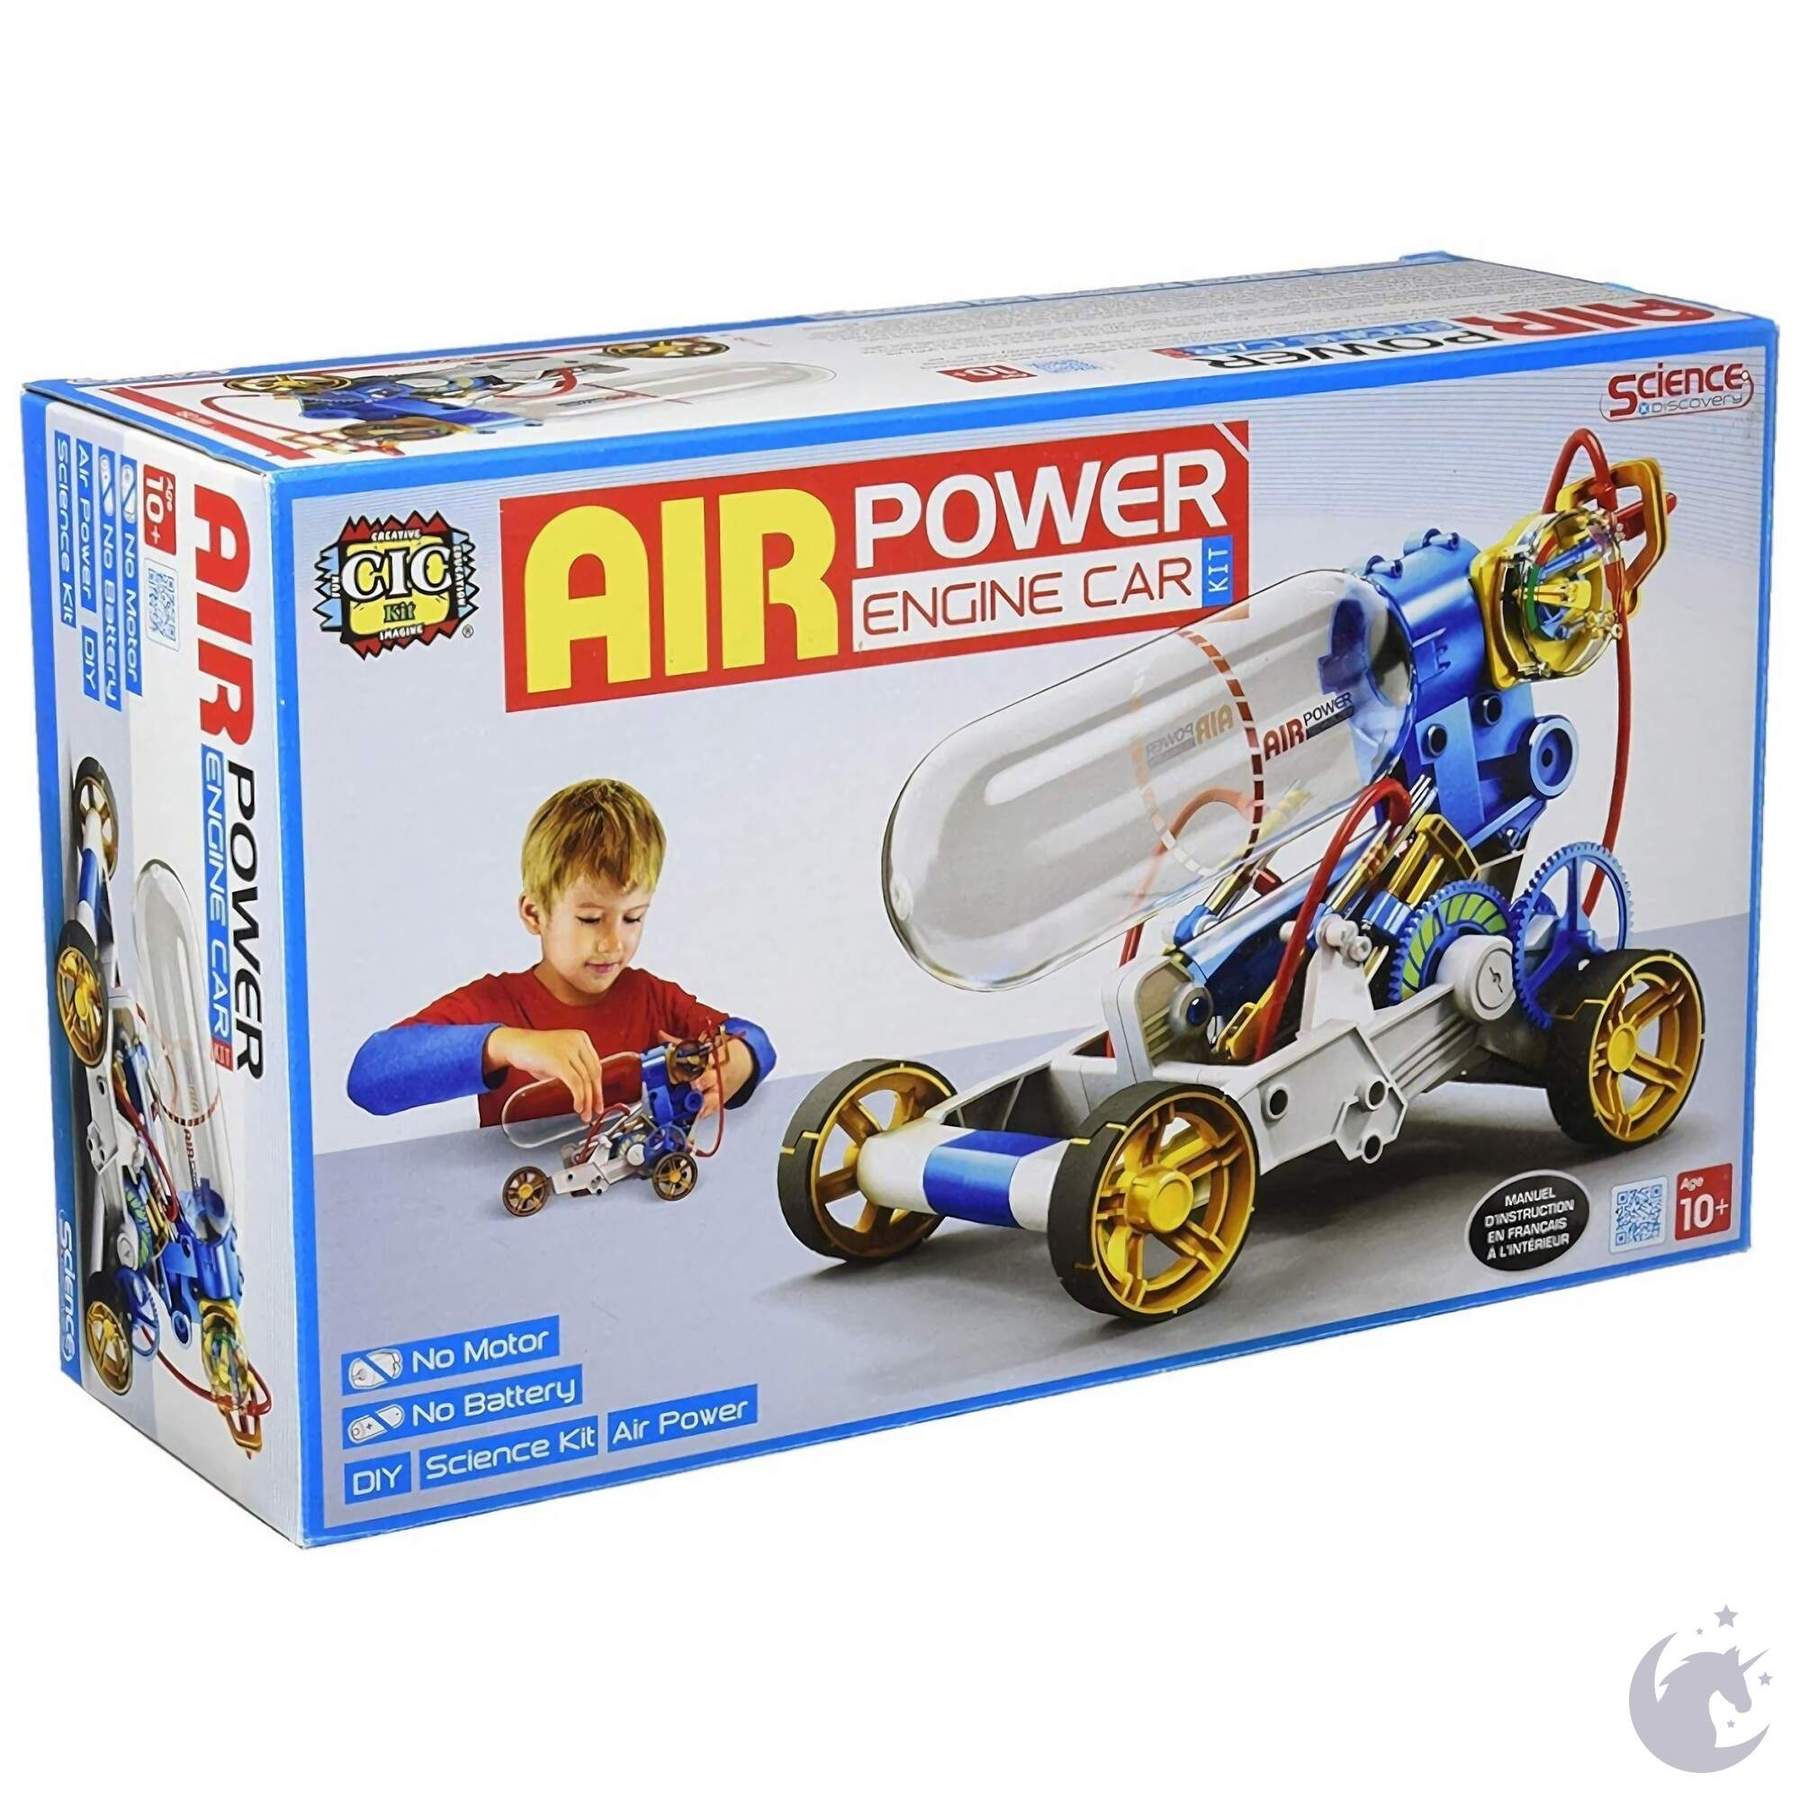 Air Power Engine Car Kaboodles Toy Store - Victoria